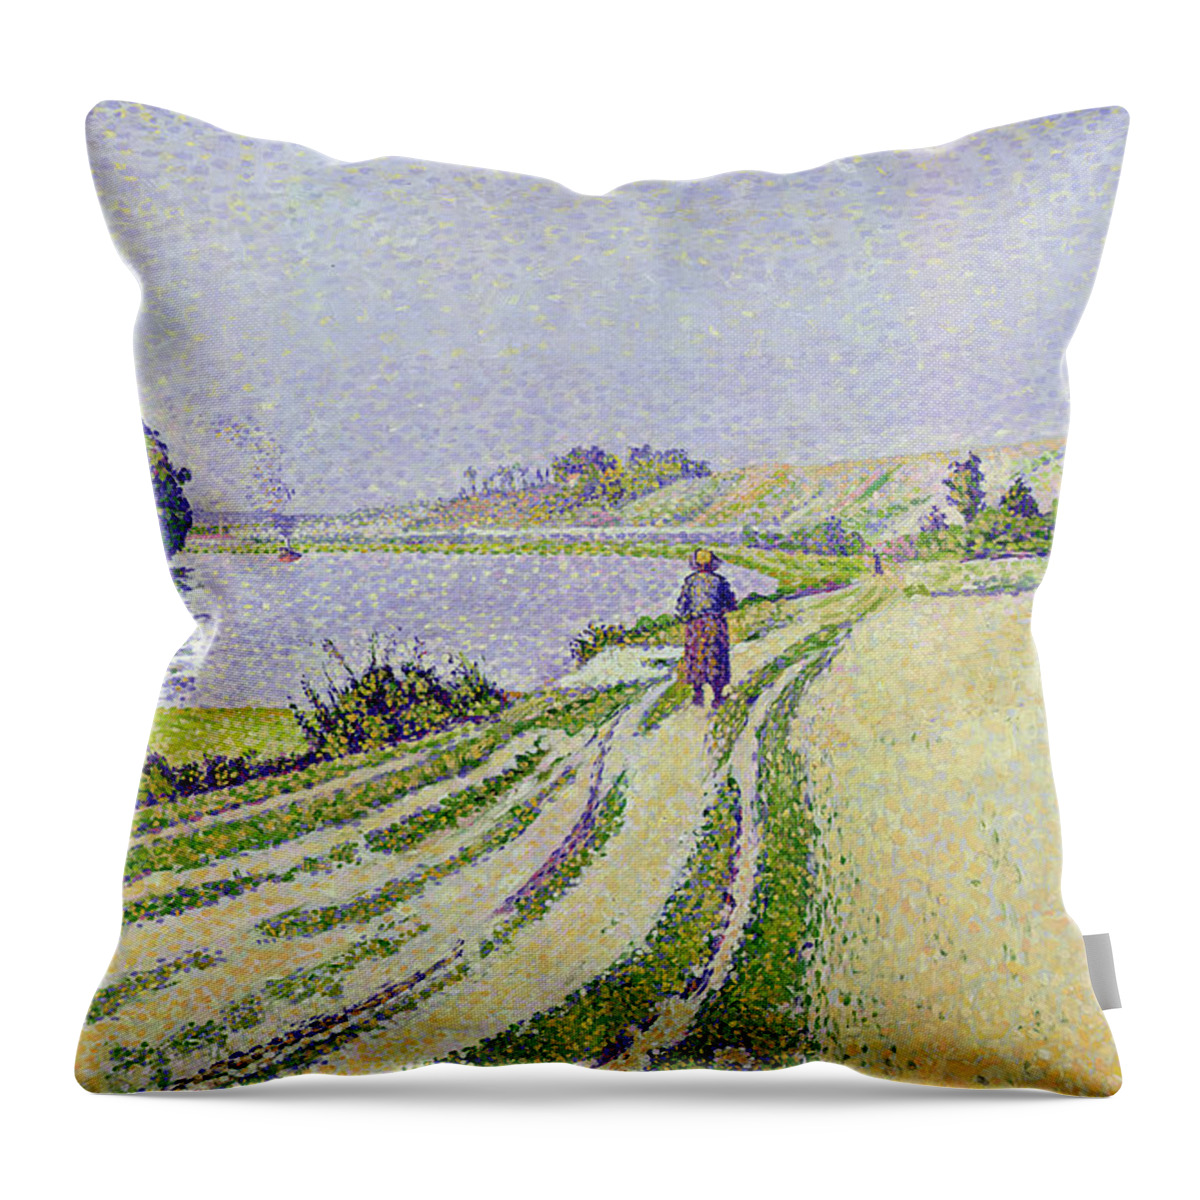 Herblay Throw Pillow featuring the painting Herblay La River by Paul Signac